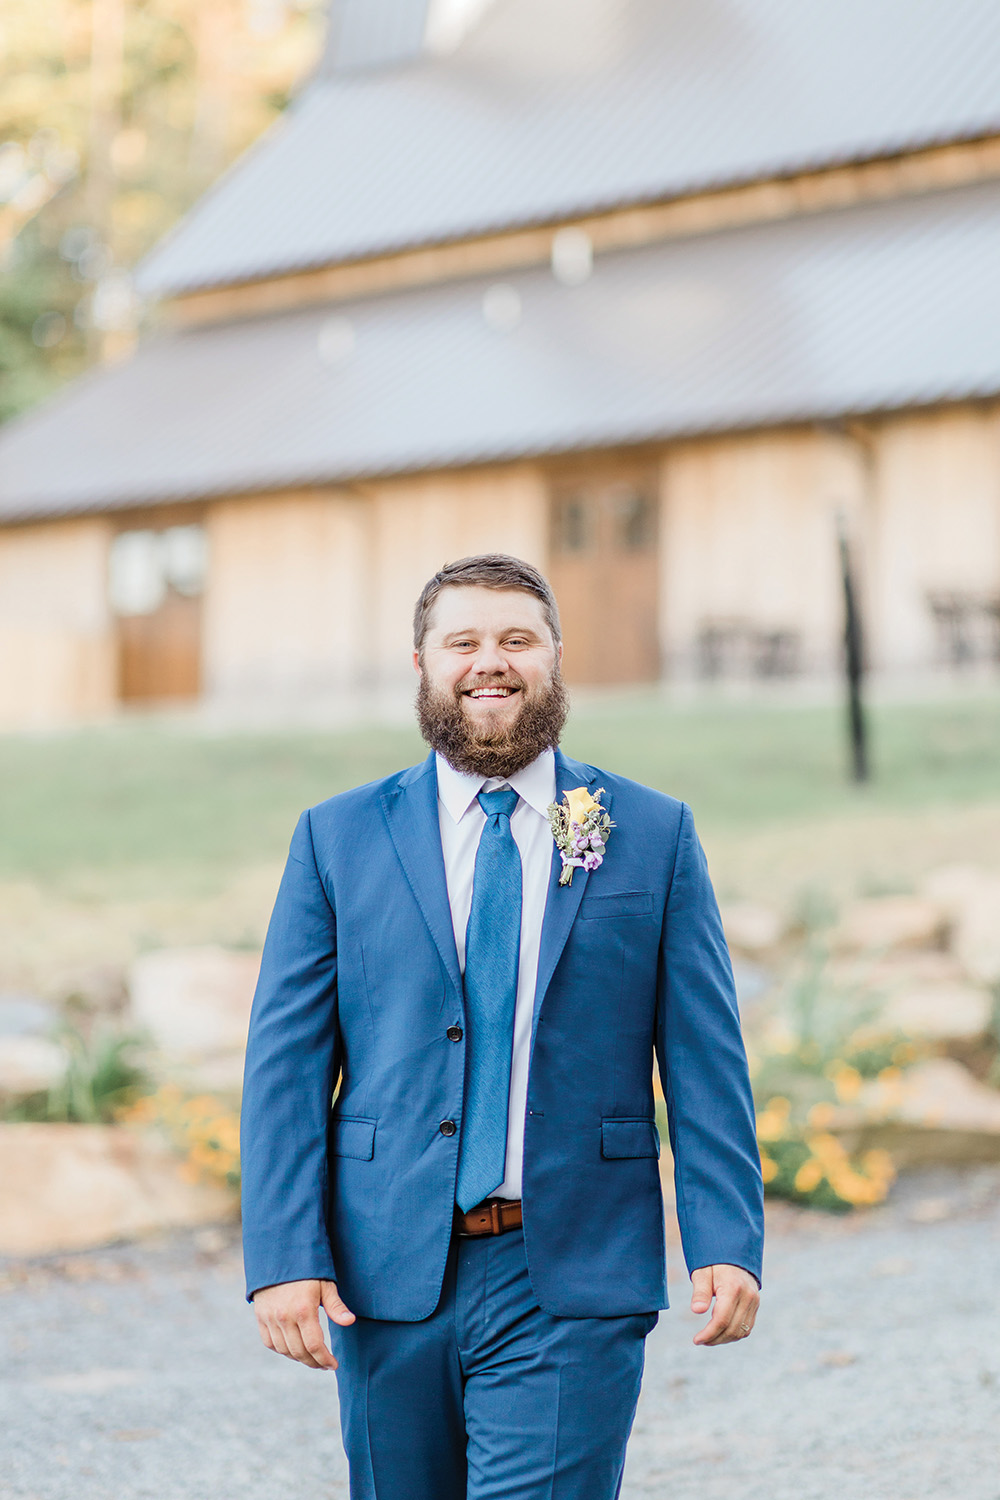 groom in navy blue suit smiling outside barn location